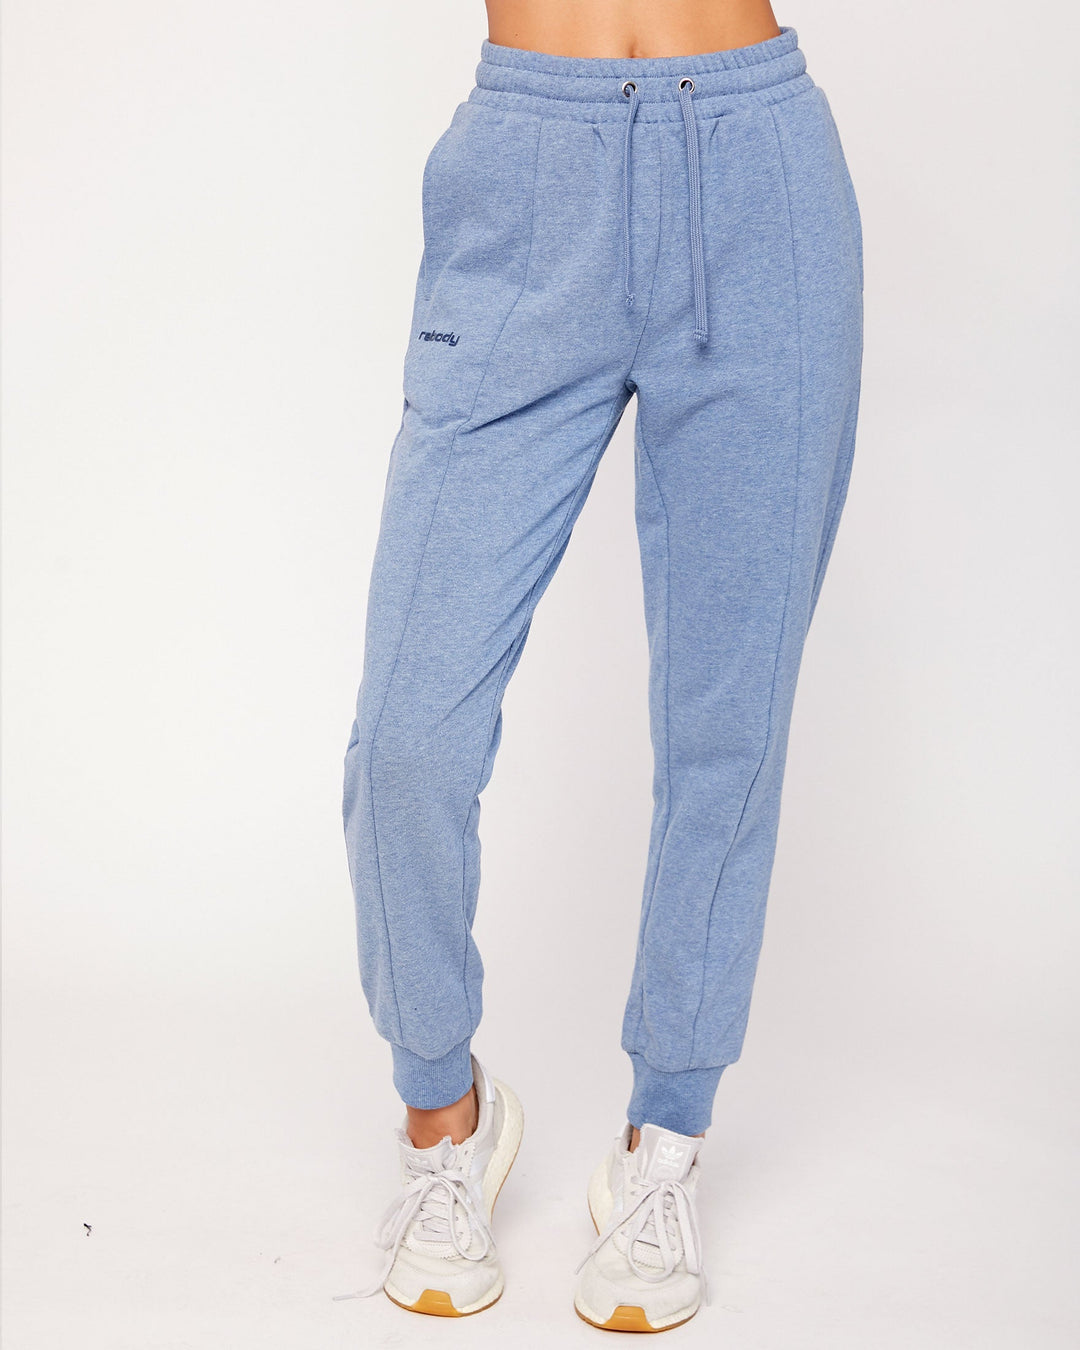 Rebody Pintuck French Terry Sweatpants